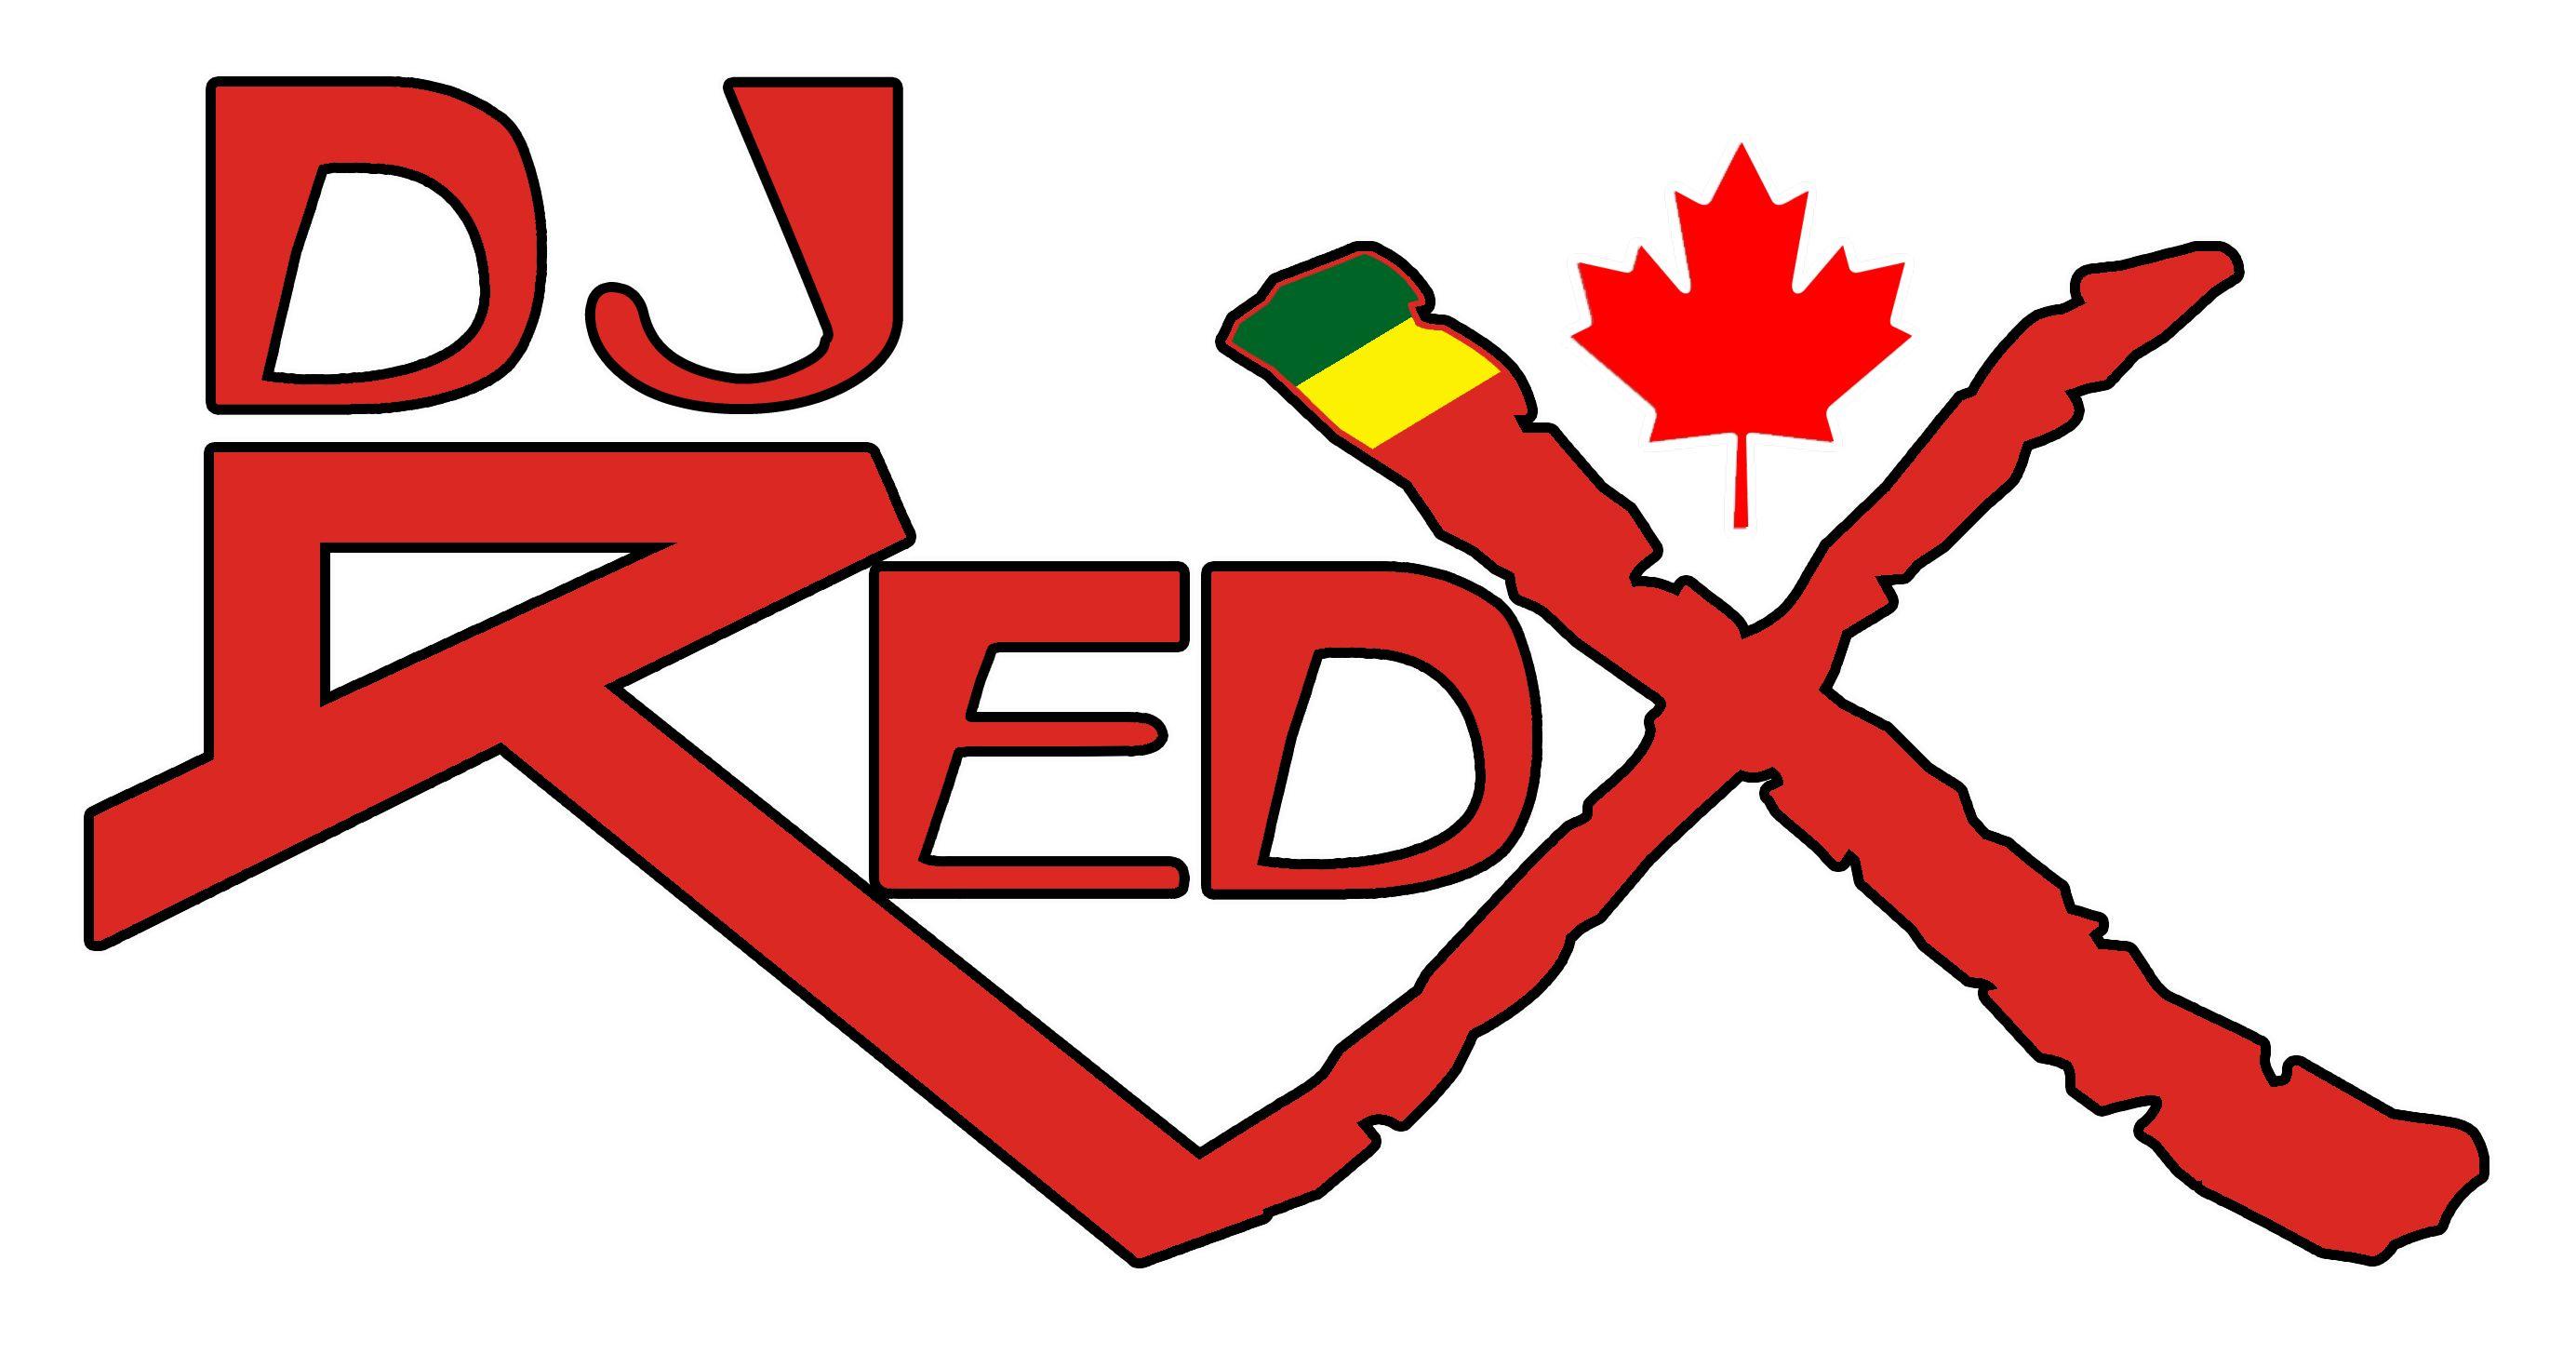 Red X Logo - DJ Red X - The Musical Mash Up